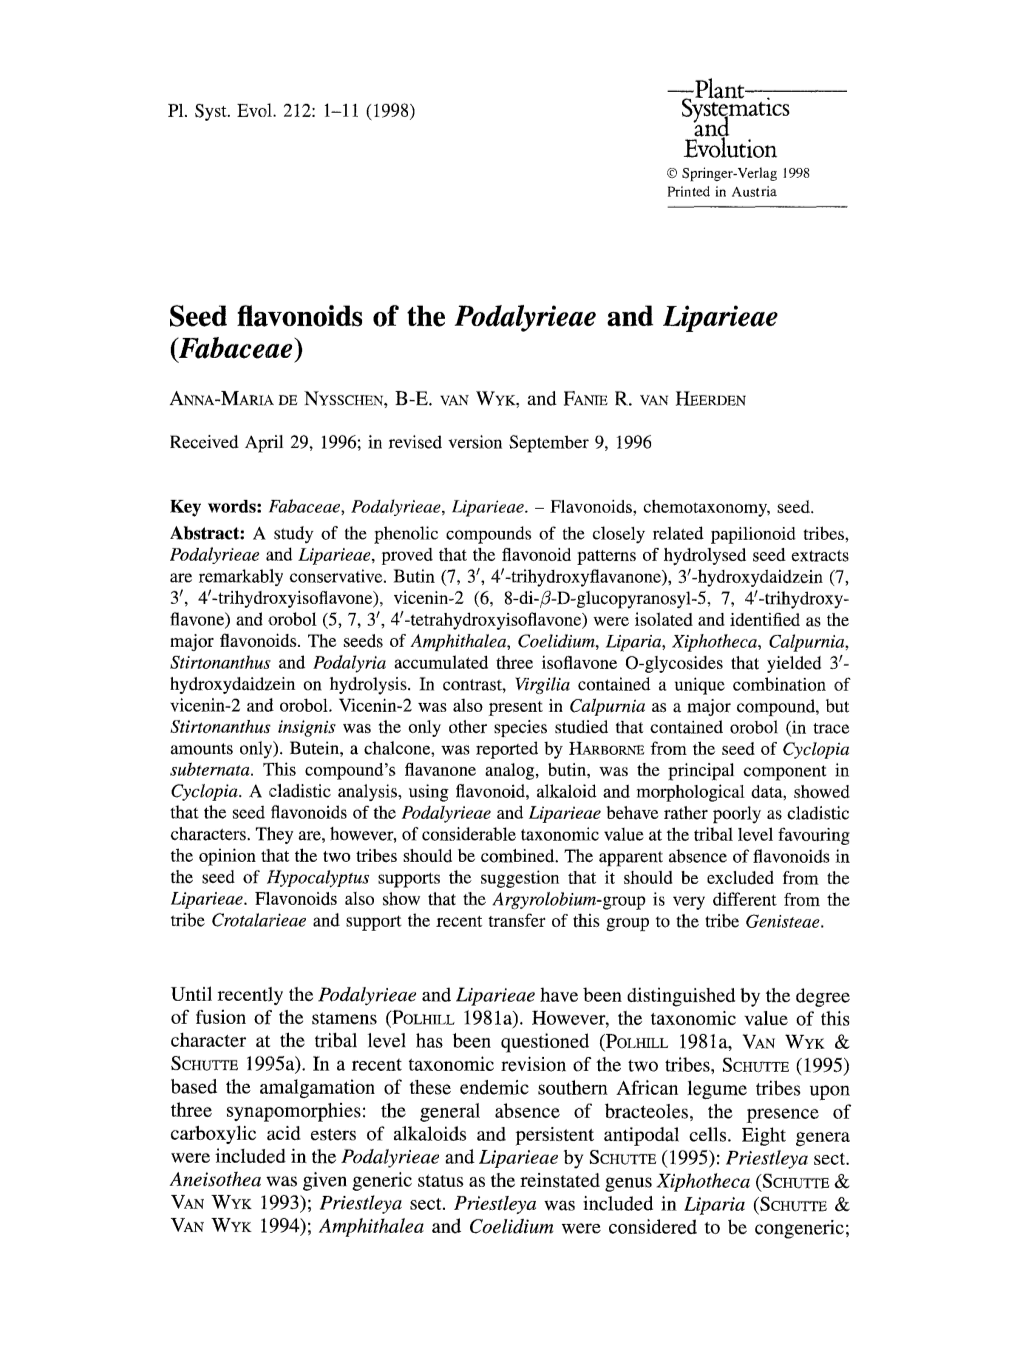 Seed Flavonoids of the Podalyrieae and Liparieae (Fabaceae)